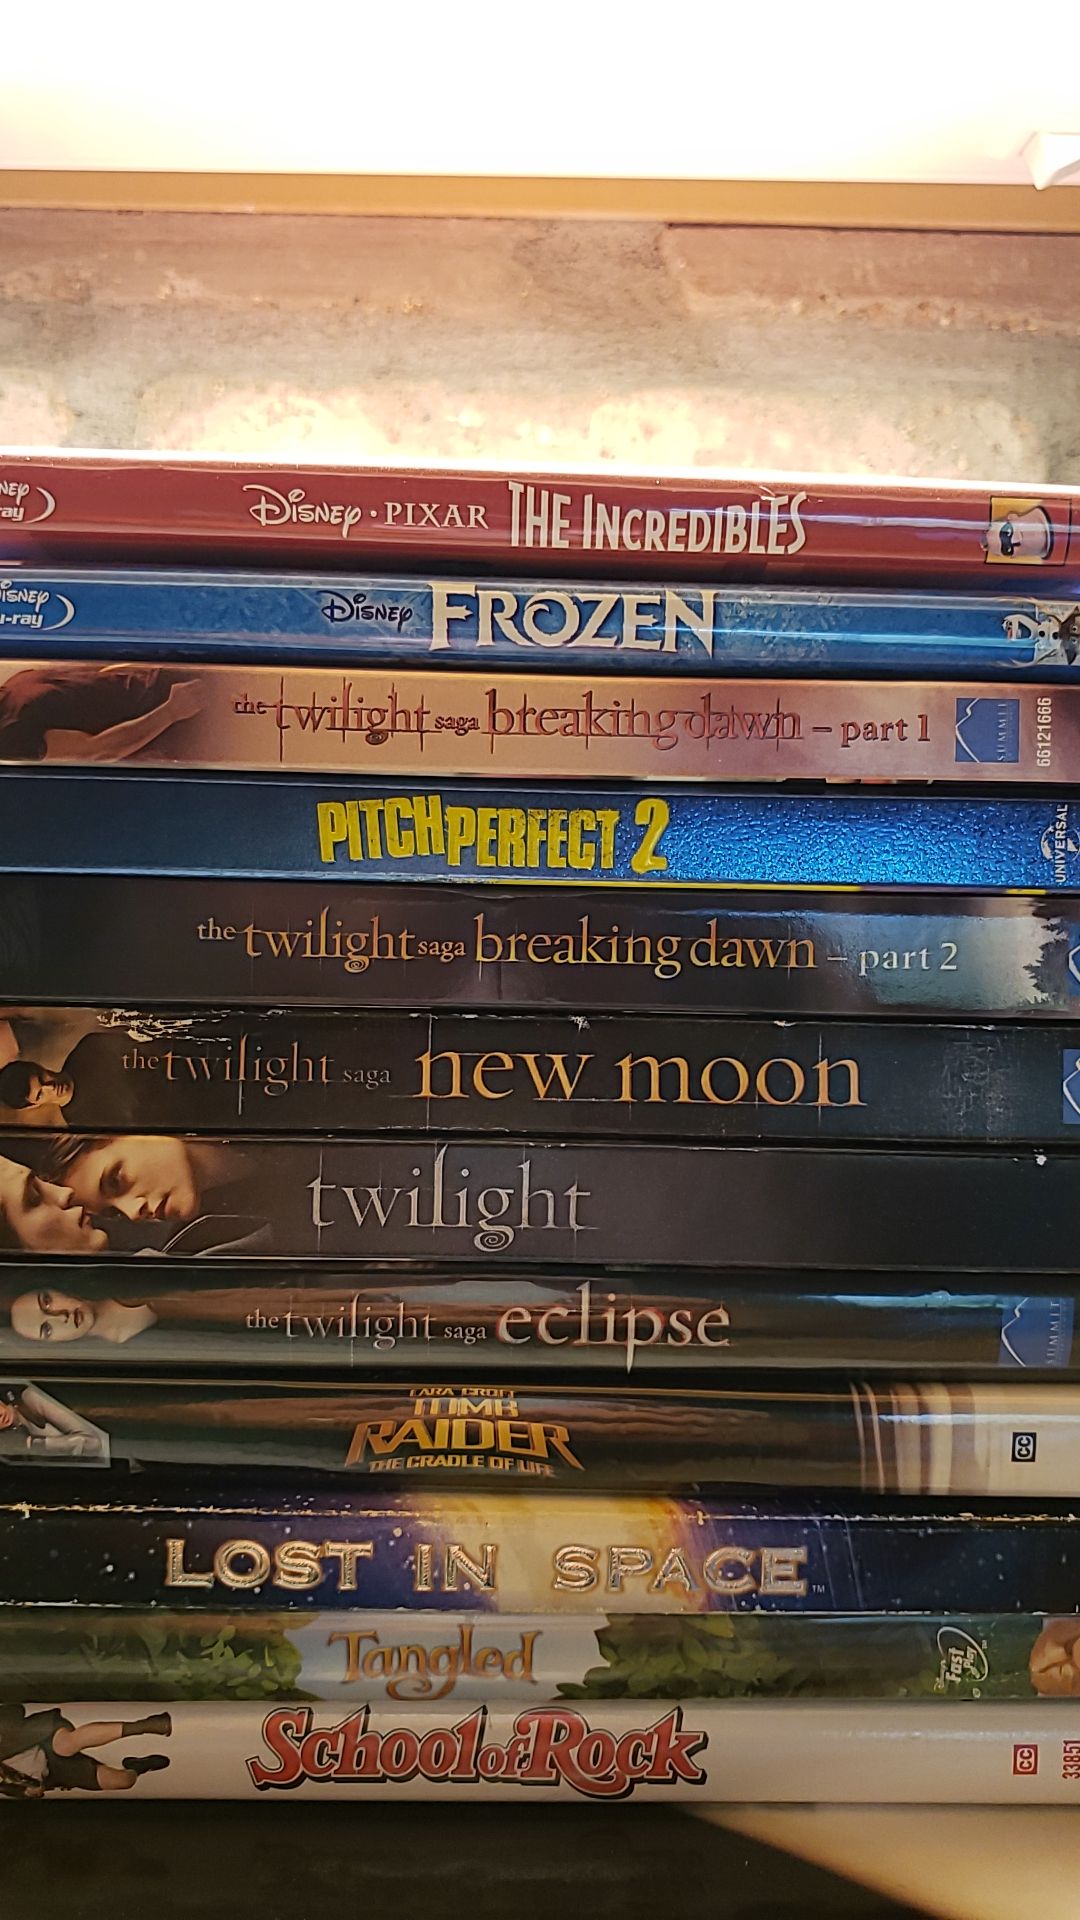 Assorted DVDs and Blu-Rays